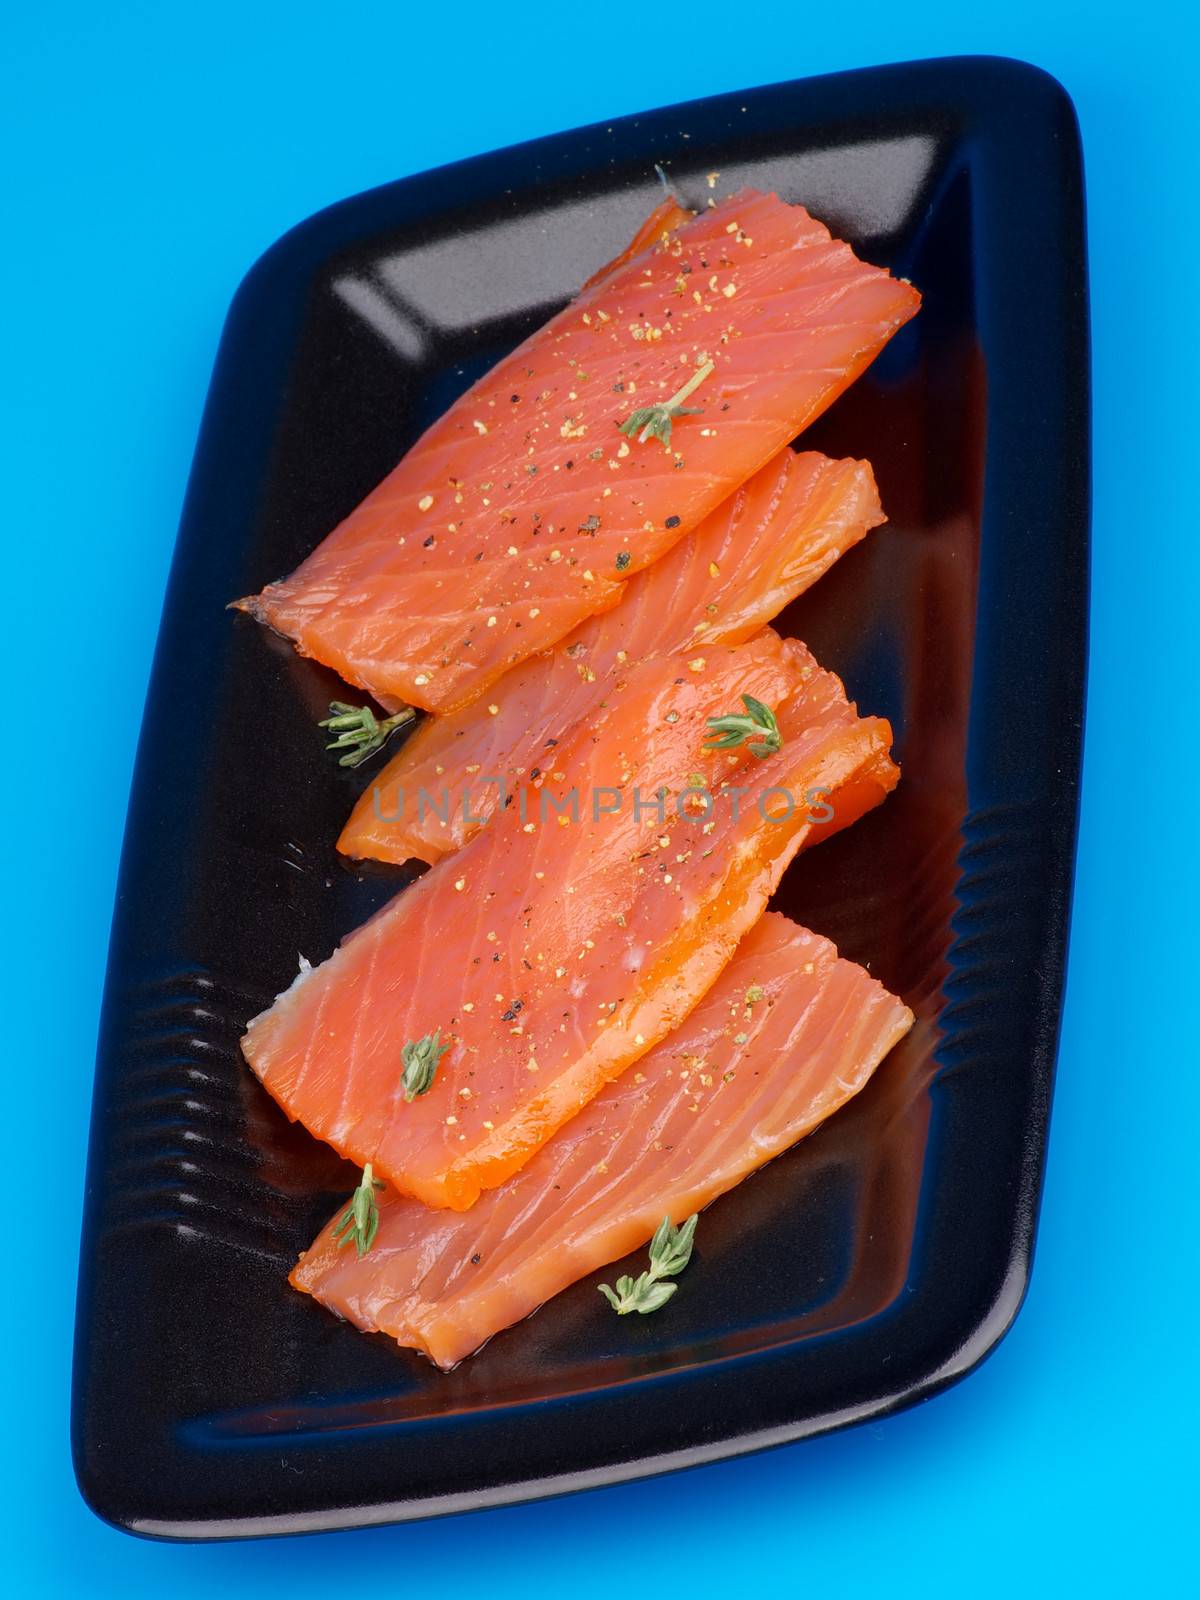 Slices of Delicious Smoked Salmon on Black Plate closeup on Blue background